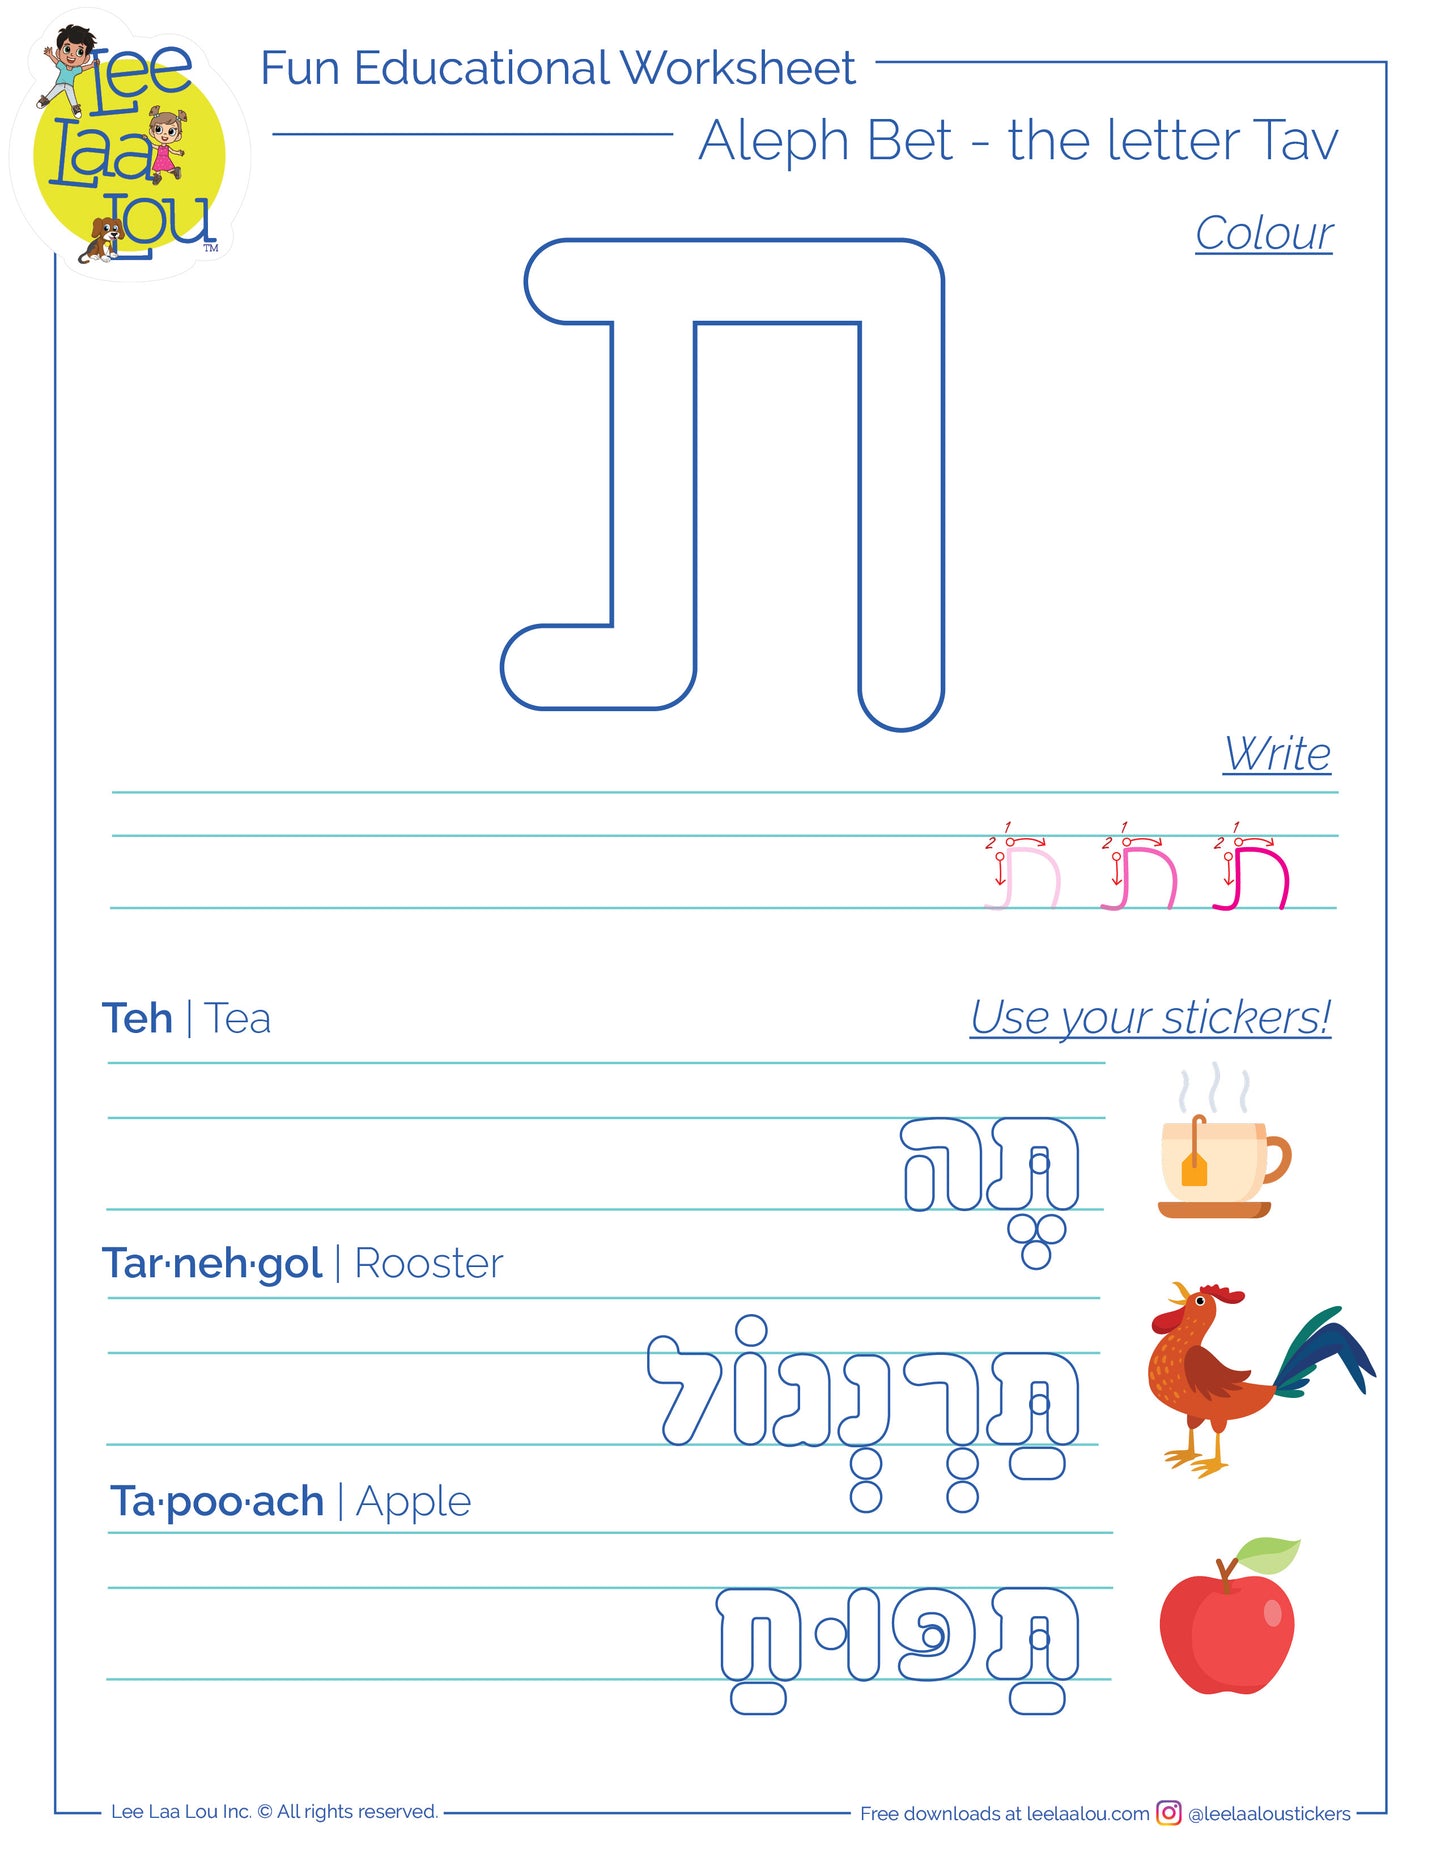 The 22nd and last letter of the Hebrew alphabet - tav - activity sheet - האות תיו דף עבודה